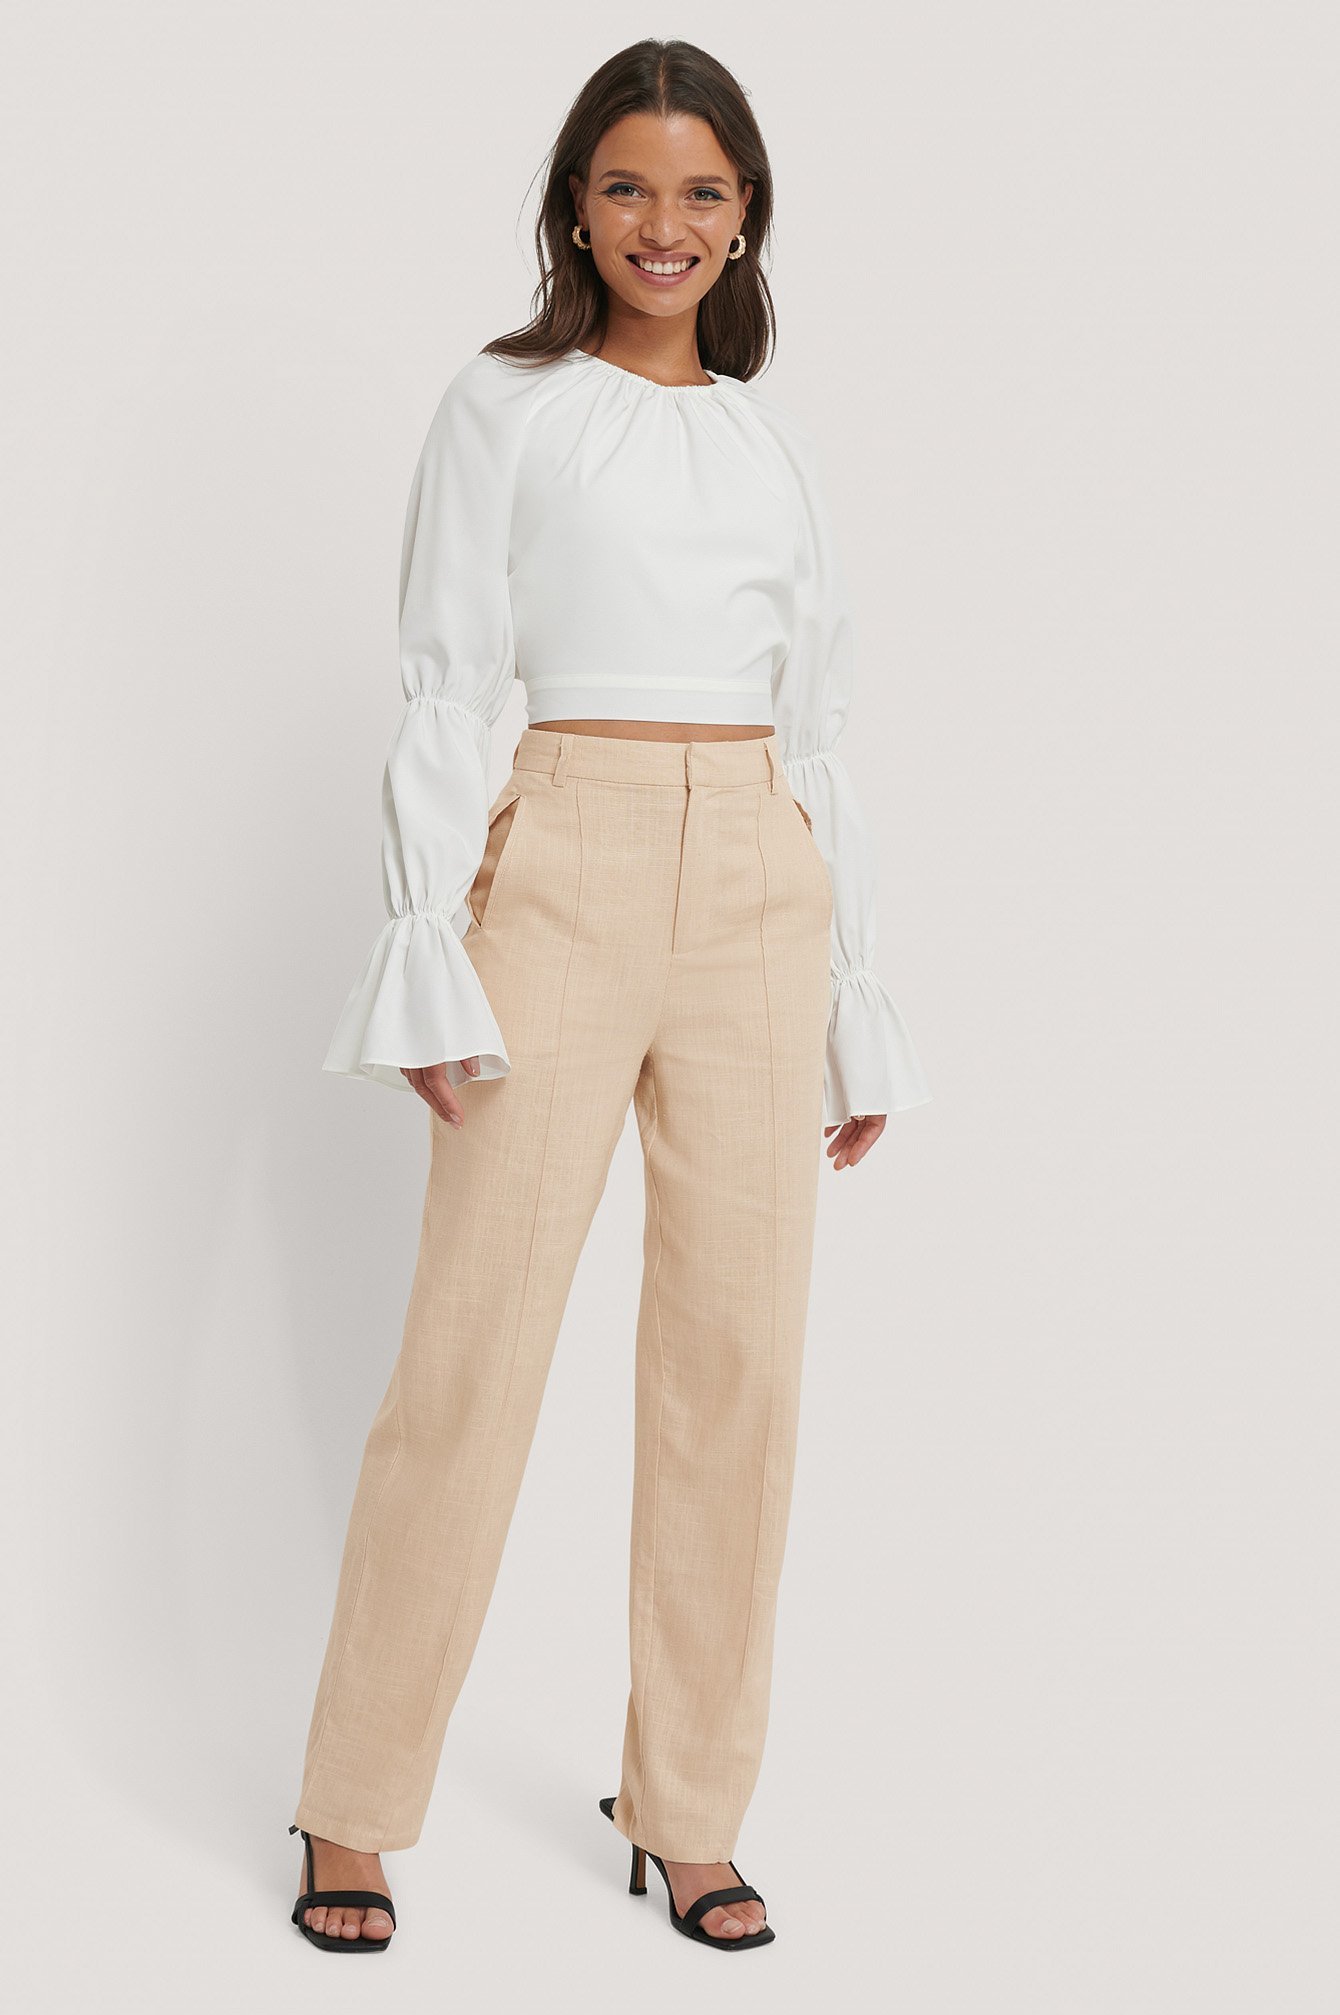 The perfect outfit for a dinner out! Style this top with a pair of trousers, heels, and some gold-colored earrings for a dressed-up yet comfy look.